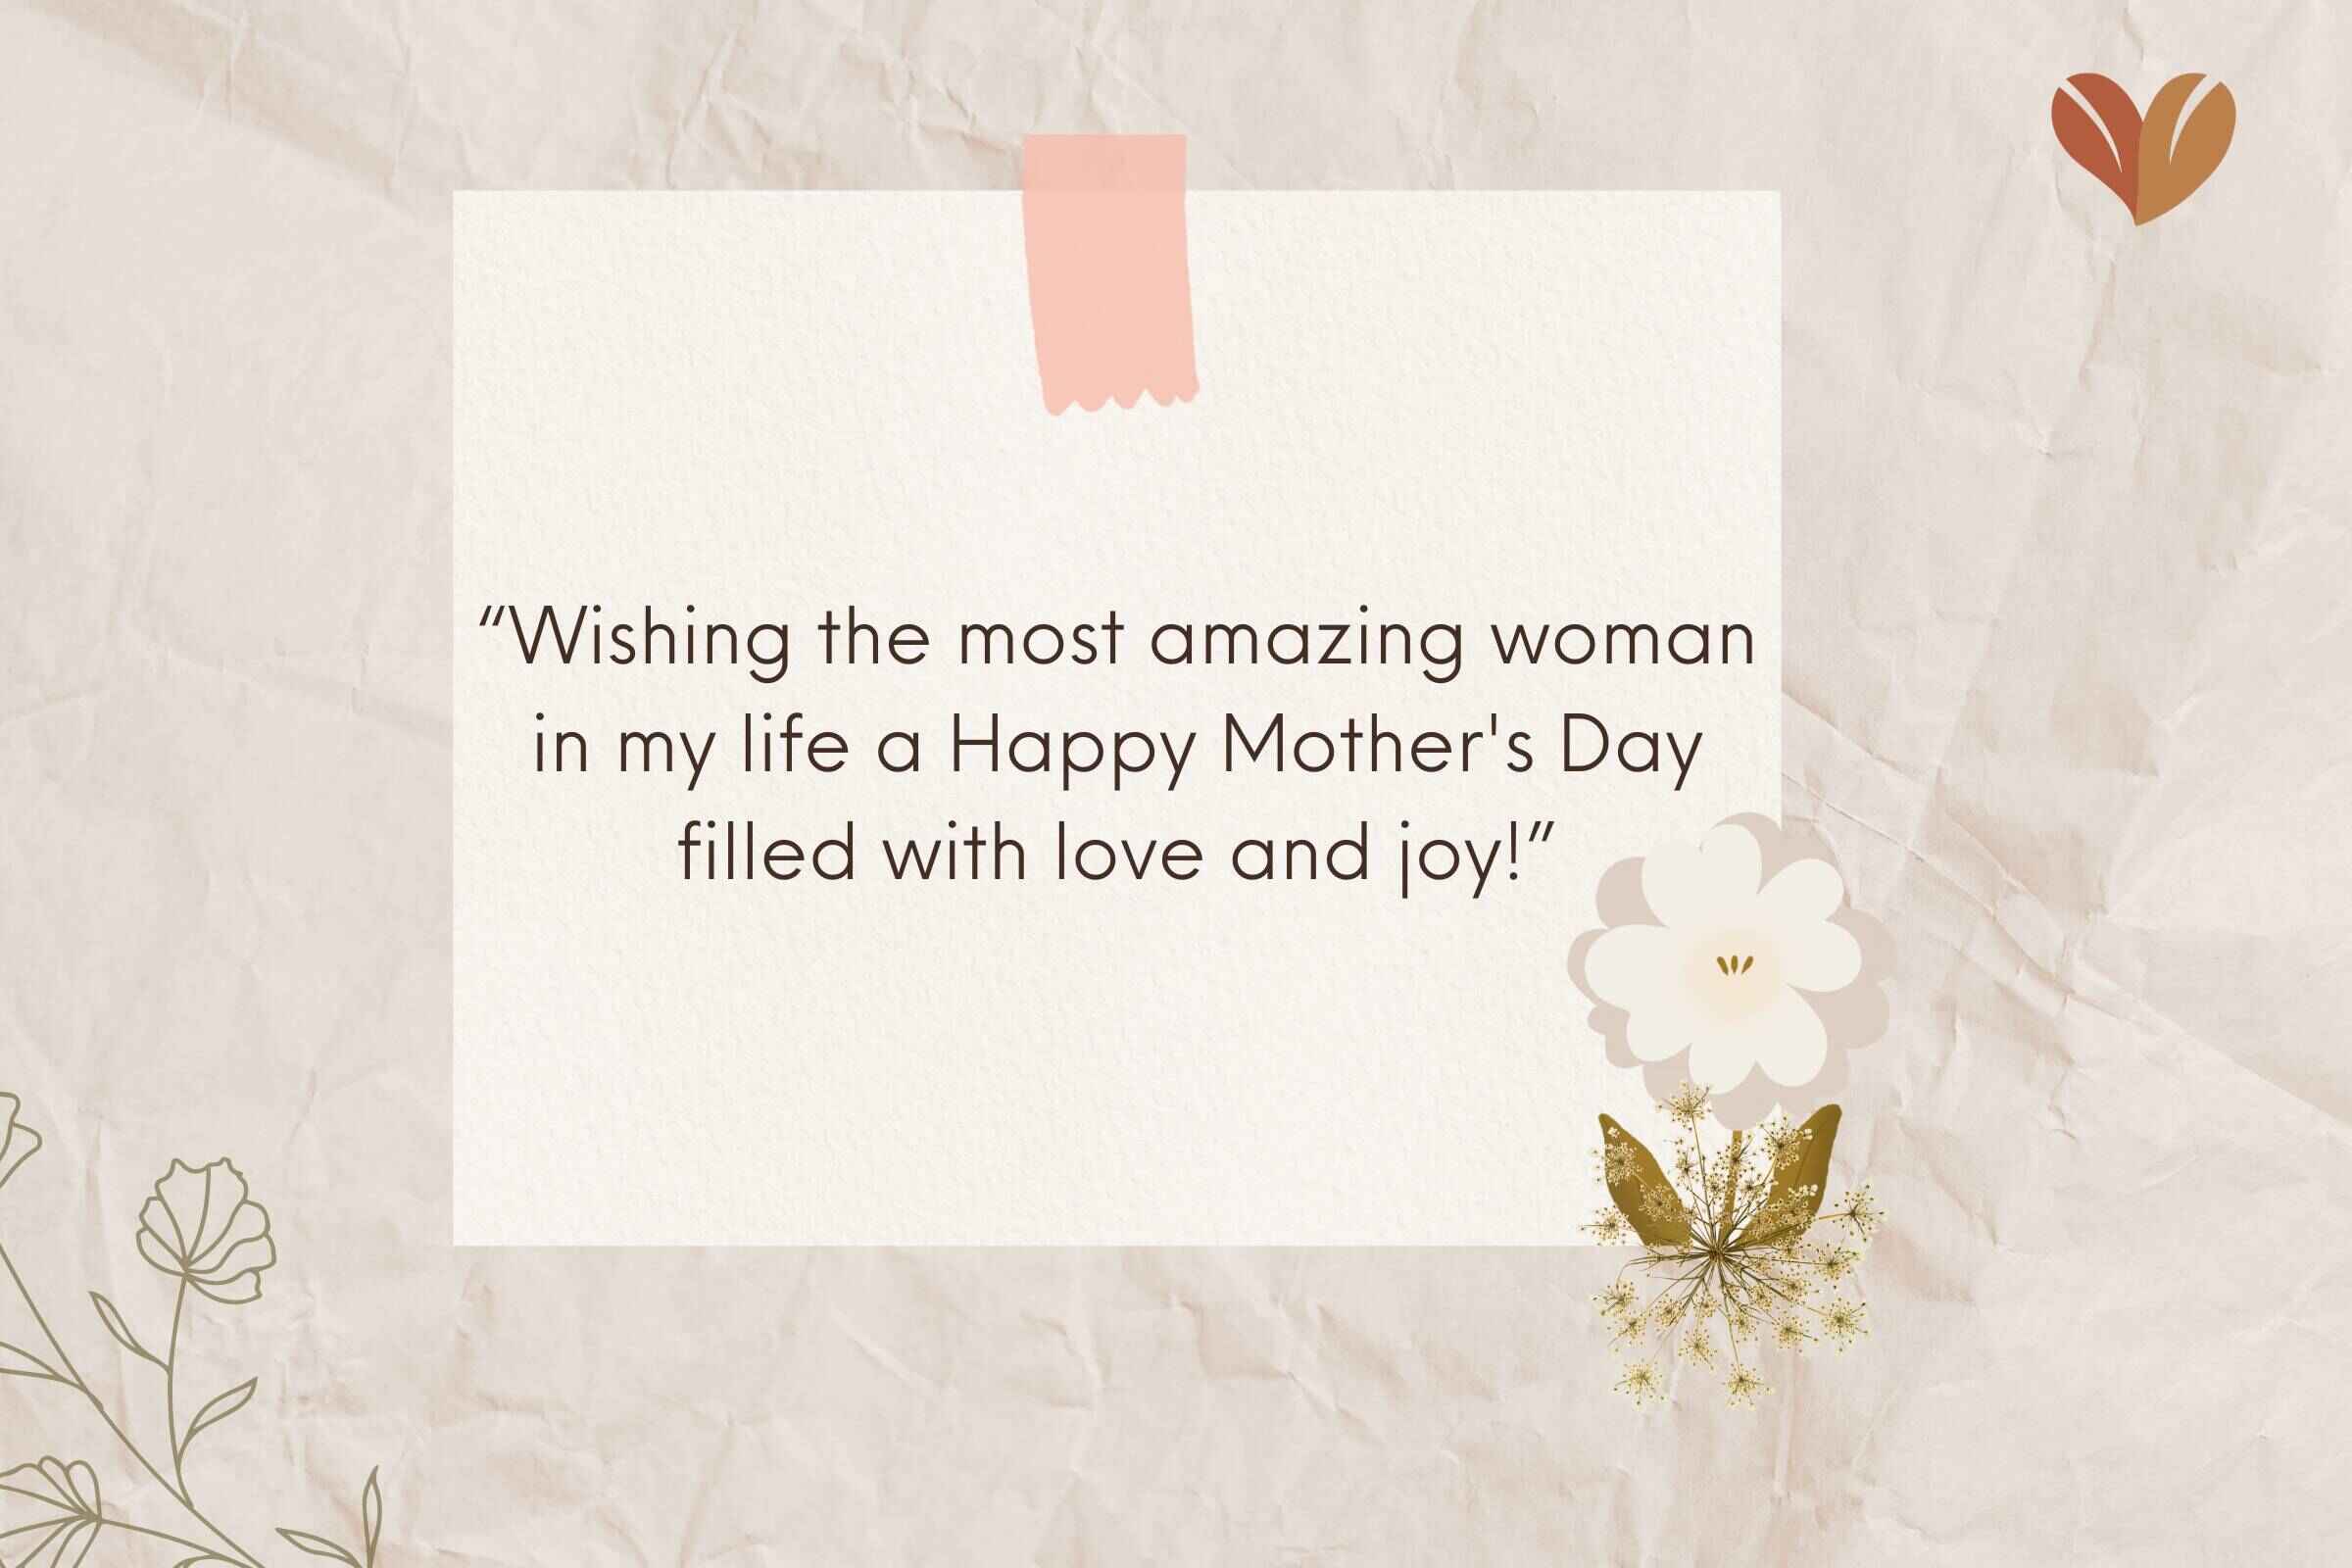 Show Your Appreciation: Happy Mother's Day Messages for Mothers-in-Law